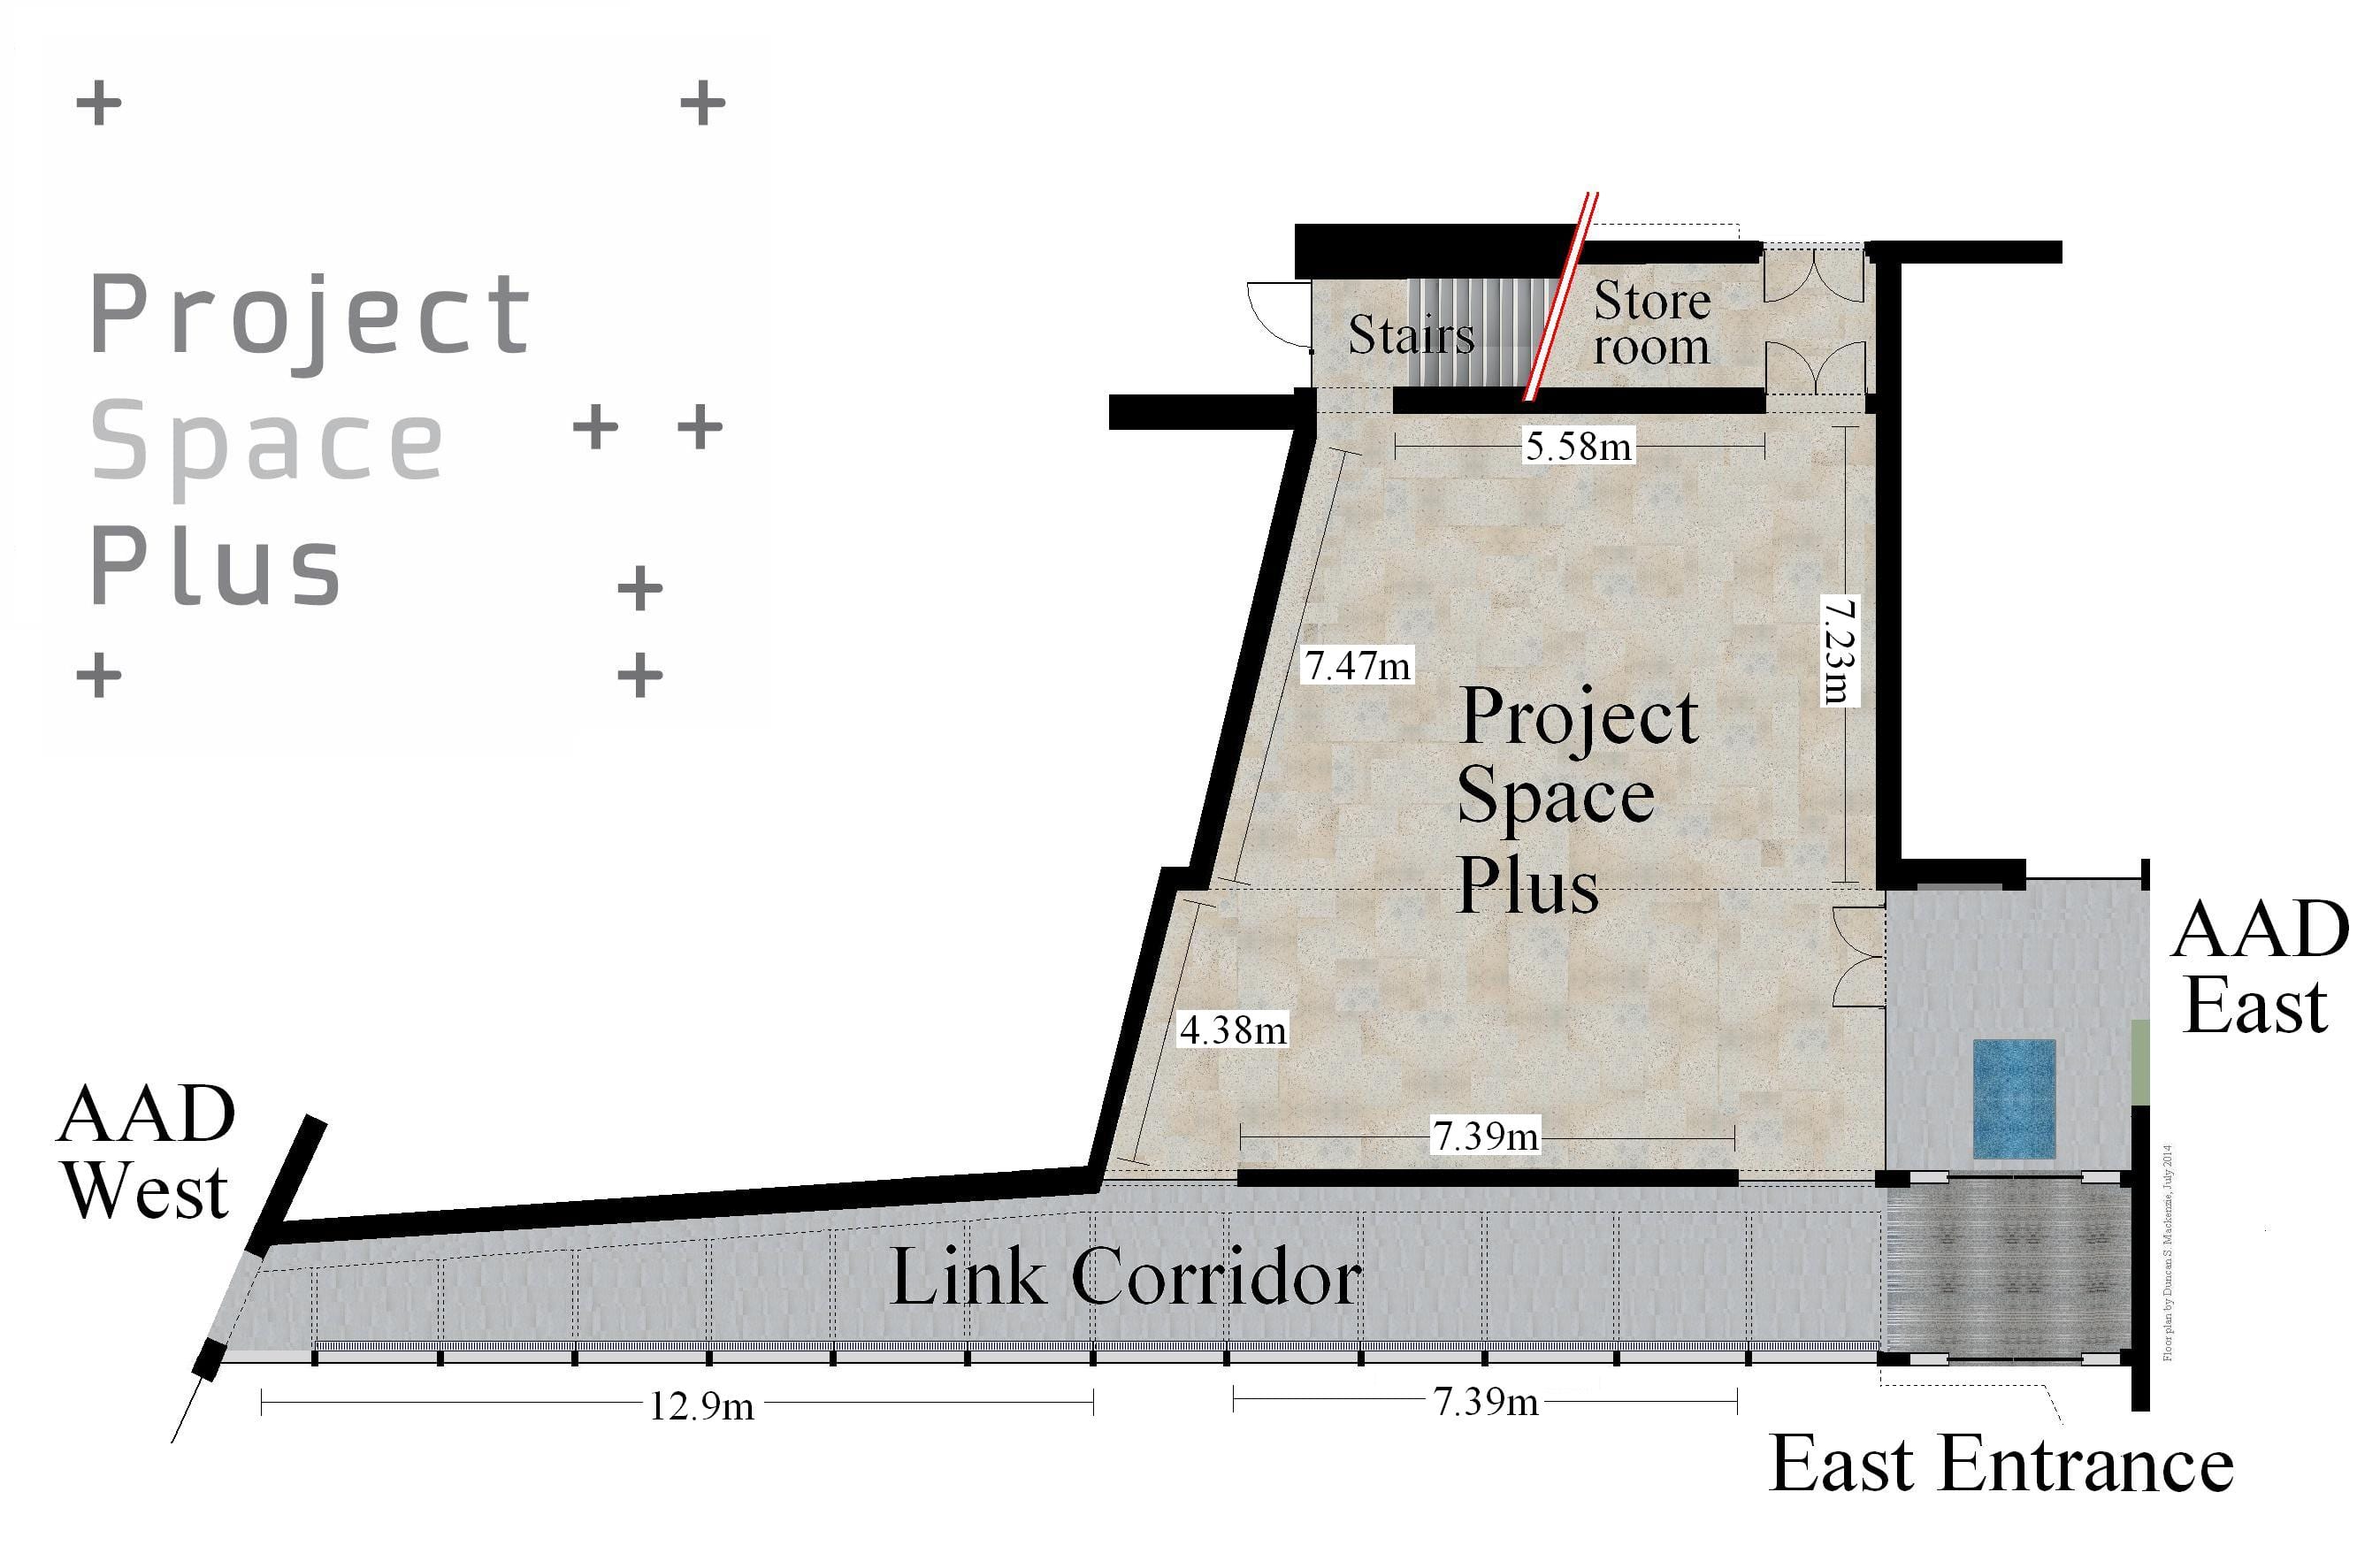 Project Space Plus Ground Floor Plan (with wall measurements in metres).